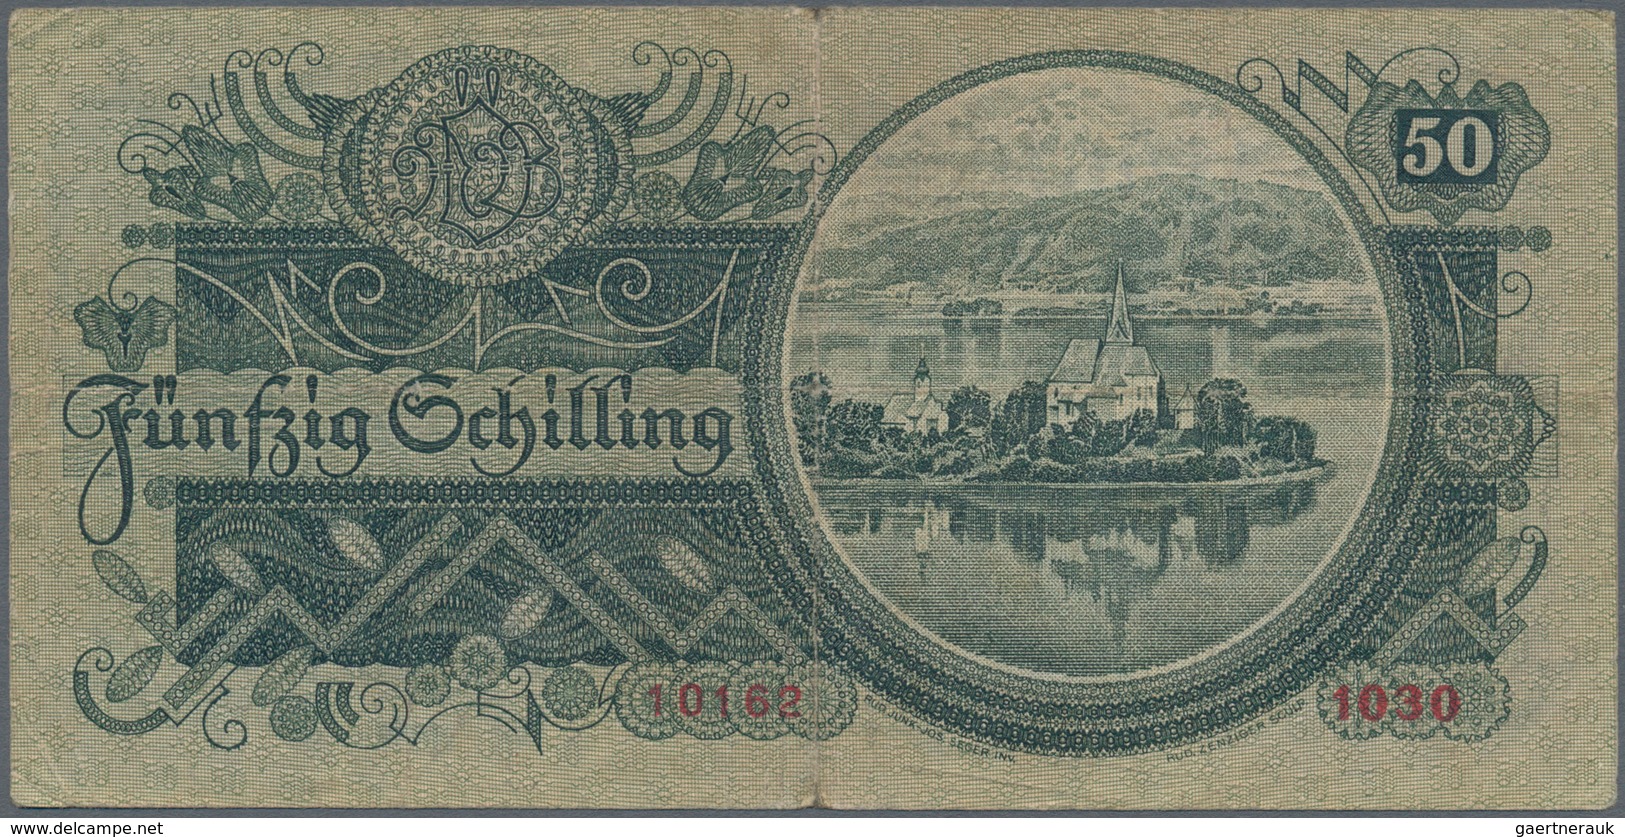 01078 Austria / Österreich: 50 Schilling 1935 P. 100, Rarer Early Date Note In Used Condition With Folds A - Austria